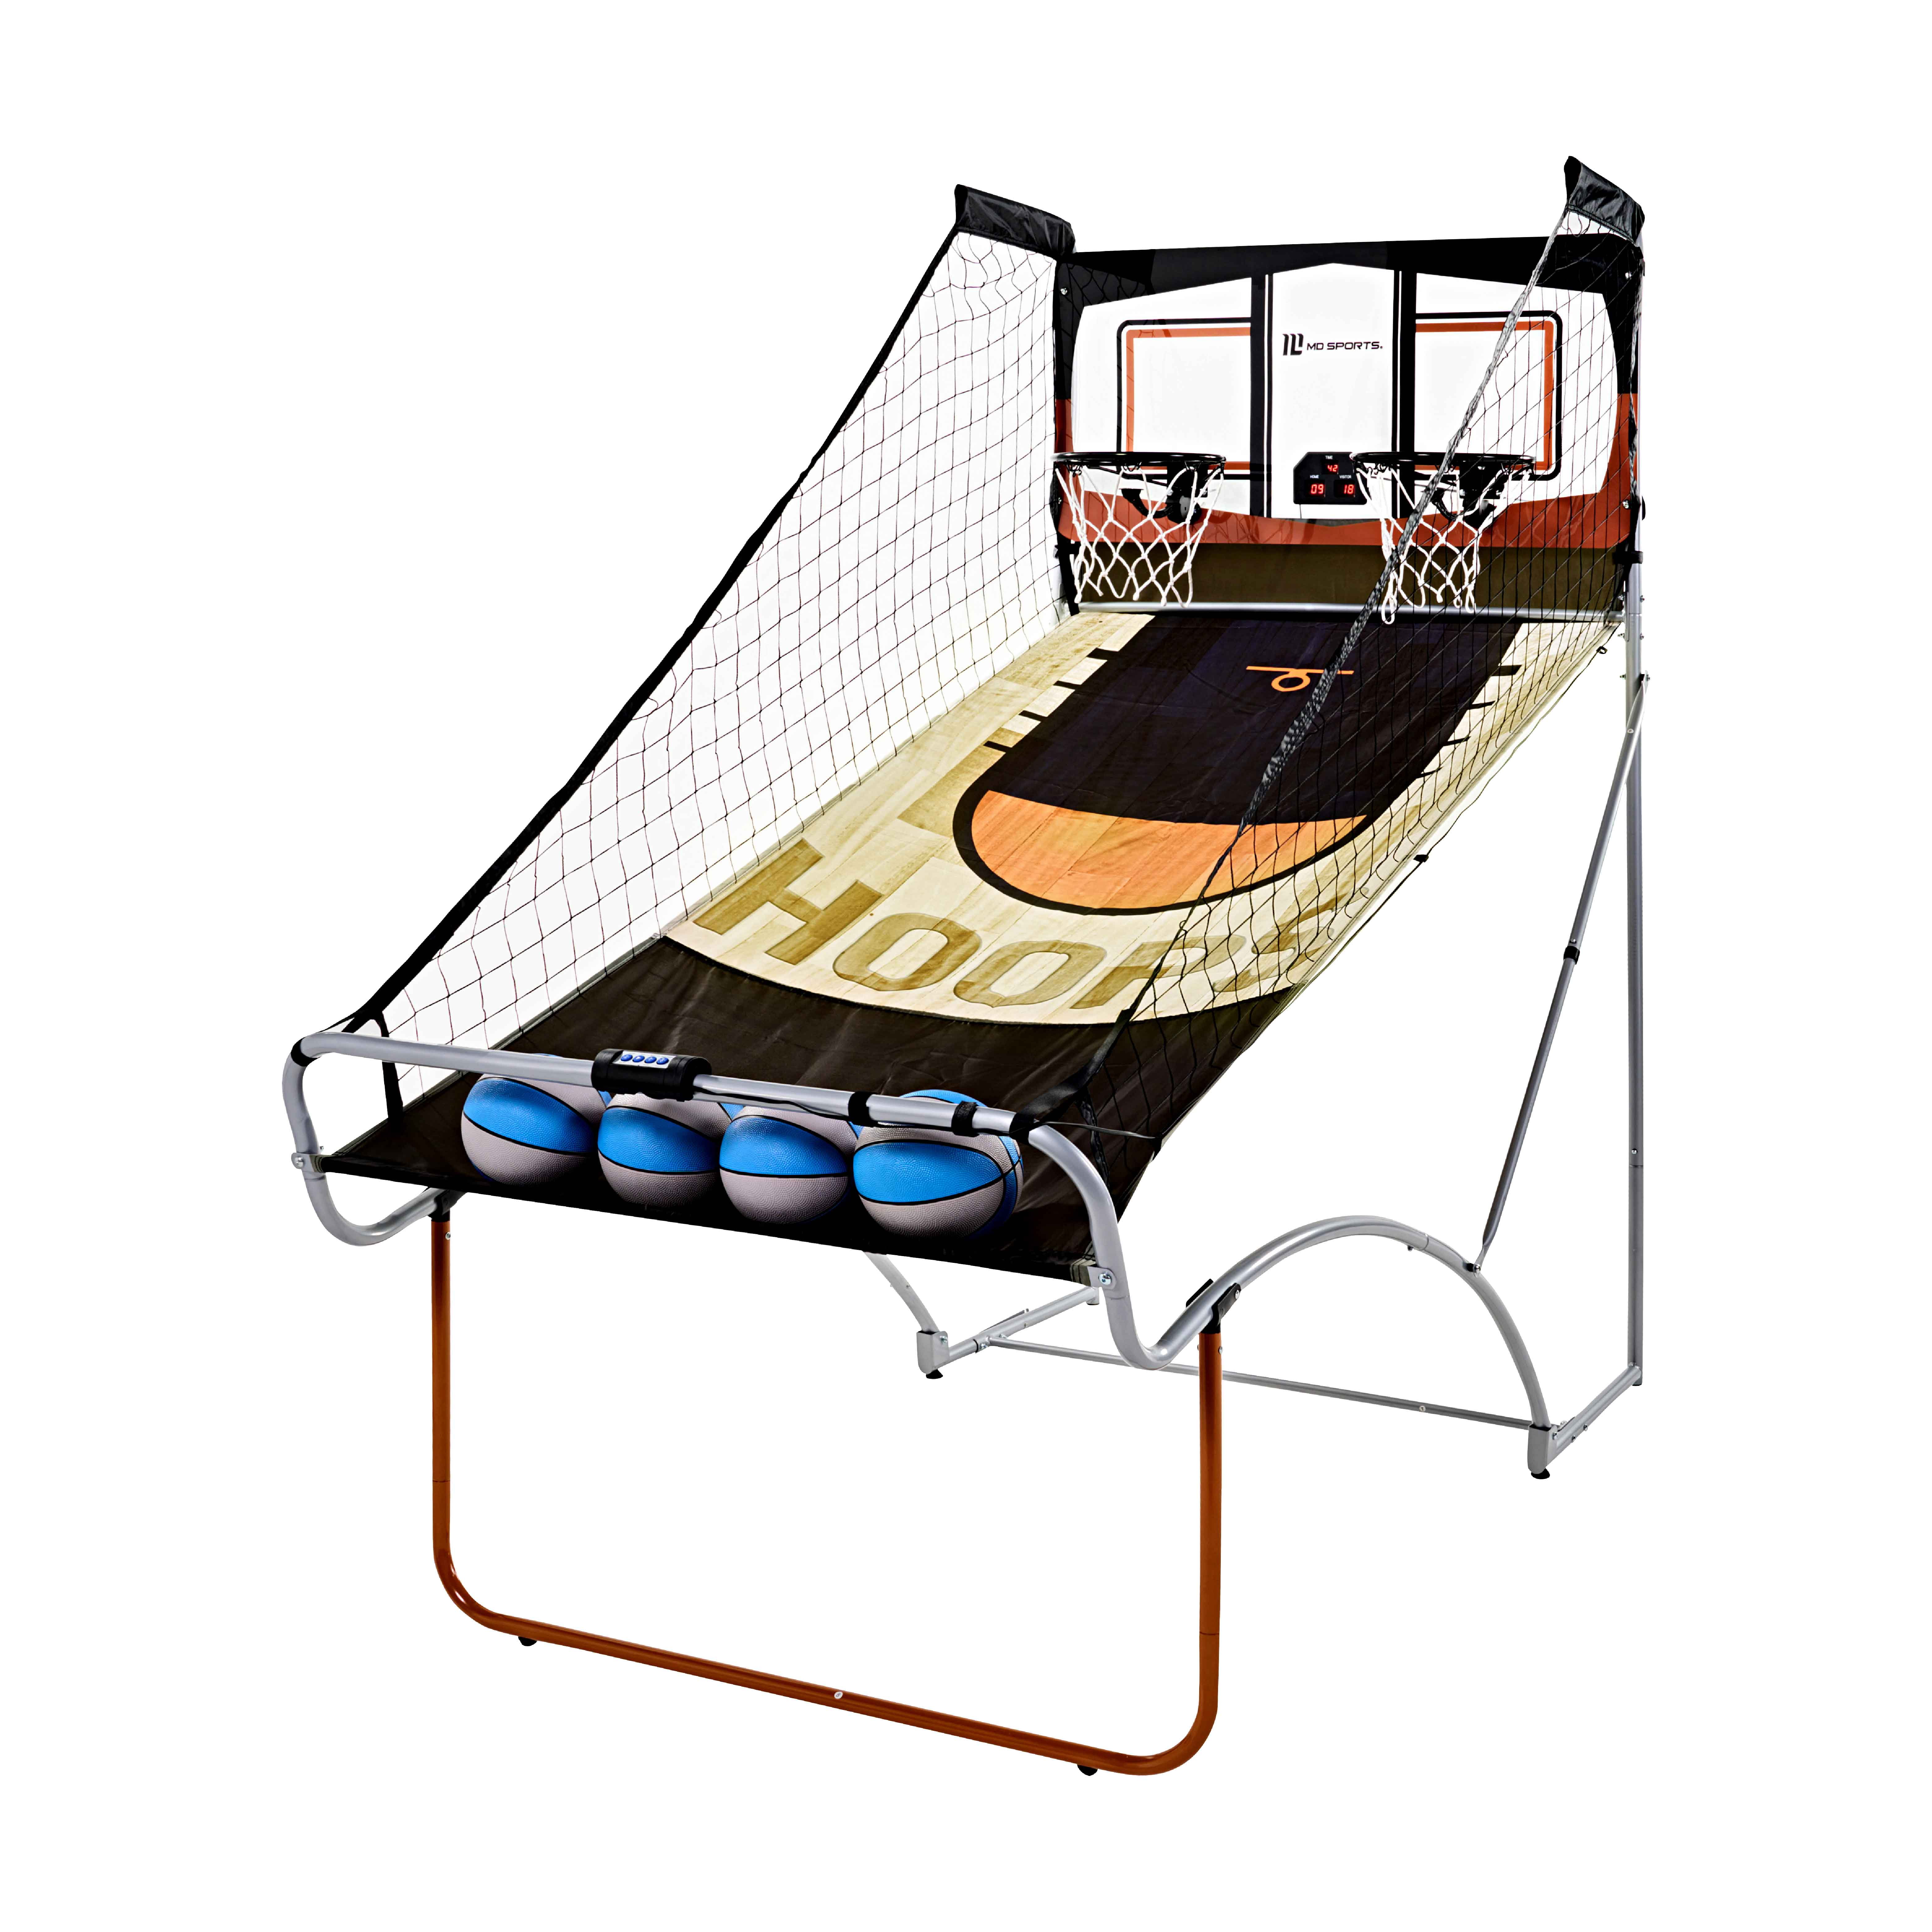  Saturnpower Shot Creator Indoor Basketball Arcade Game  Foldable Electronic Double Shootout Sport Game Official Home Dual Shot  Basketball 2 Player with 4 Balls : Sports & Outdoors